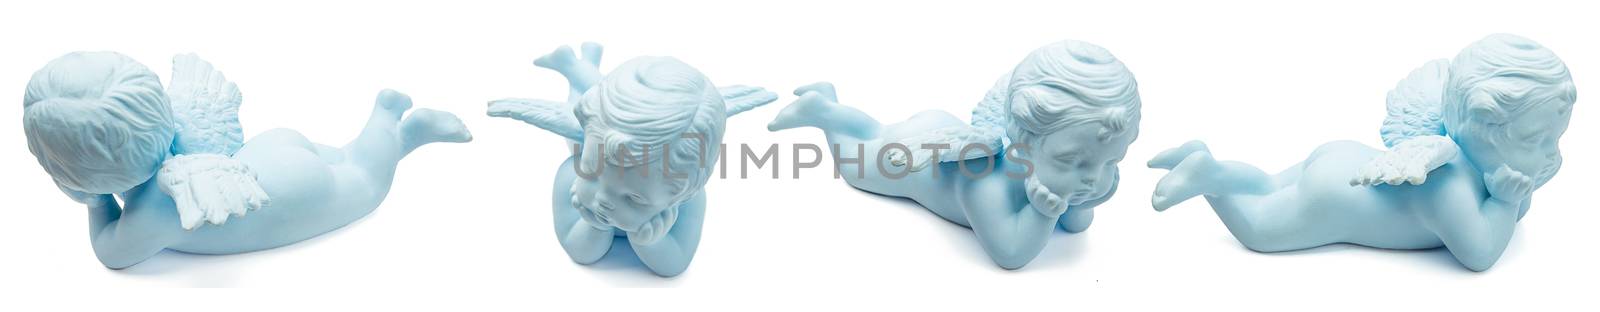 blue ceramic baby angel statue isolated on white background